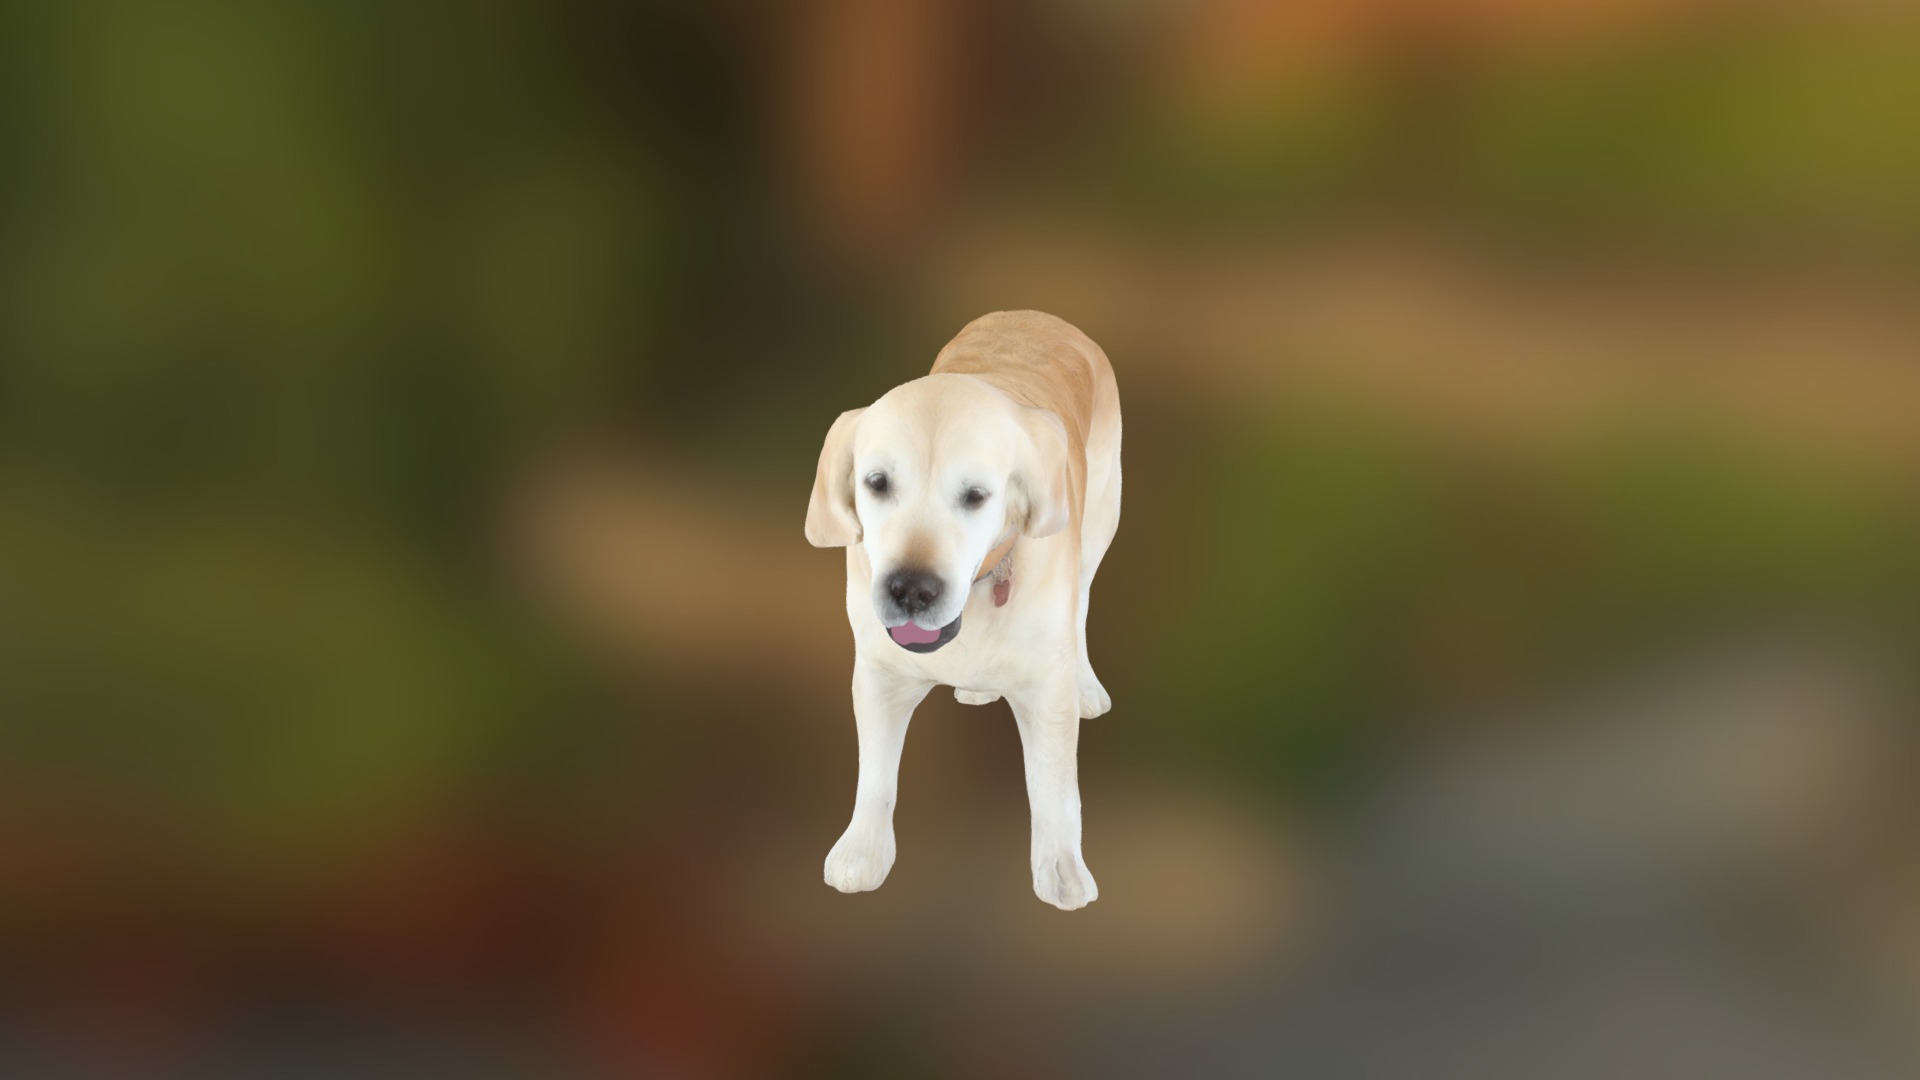 3D model Gaz - This is a 3D model of the Gaz. The 3D model is about a dog running in the grass.